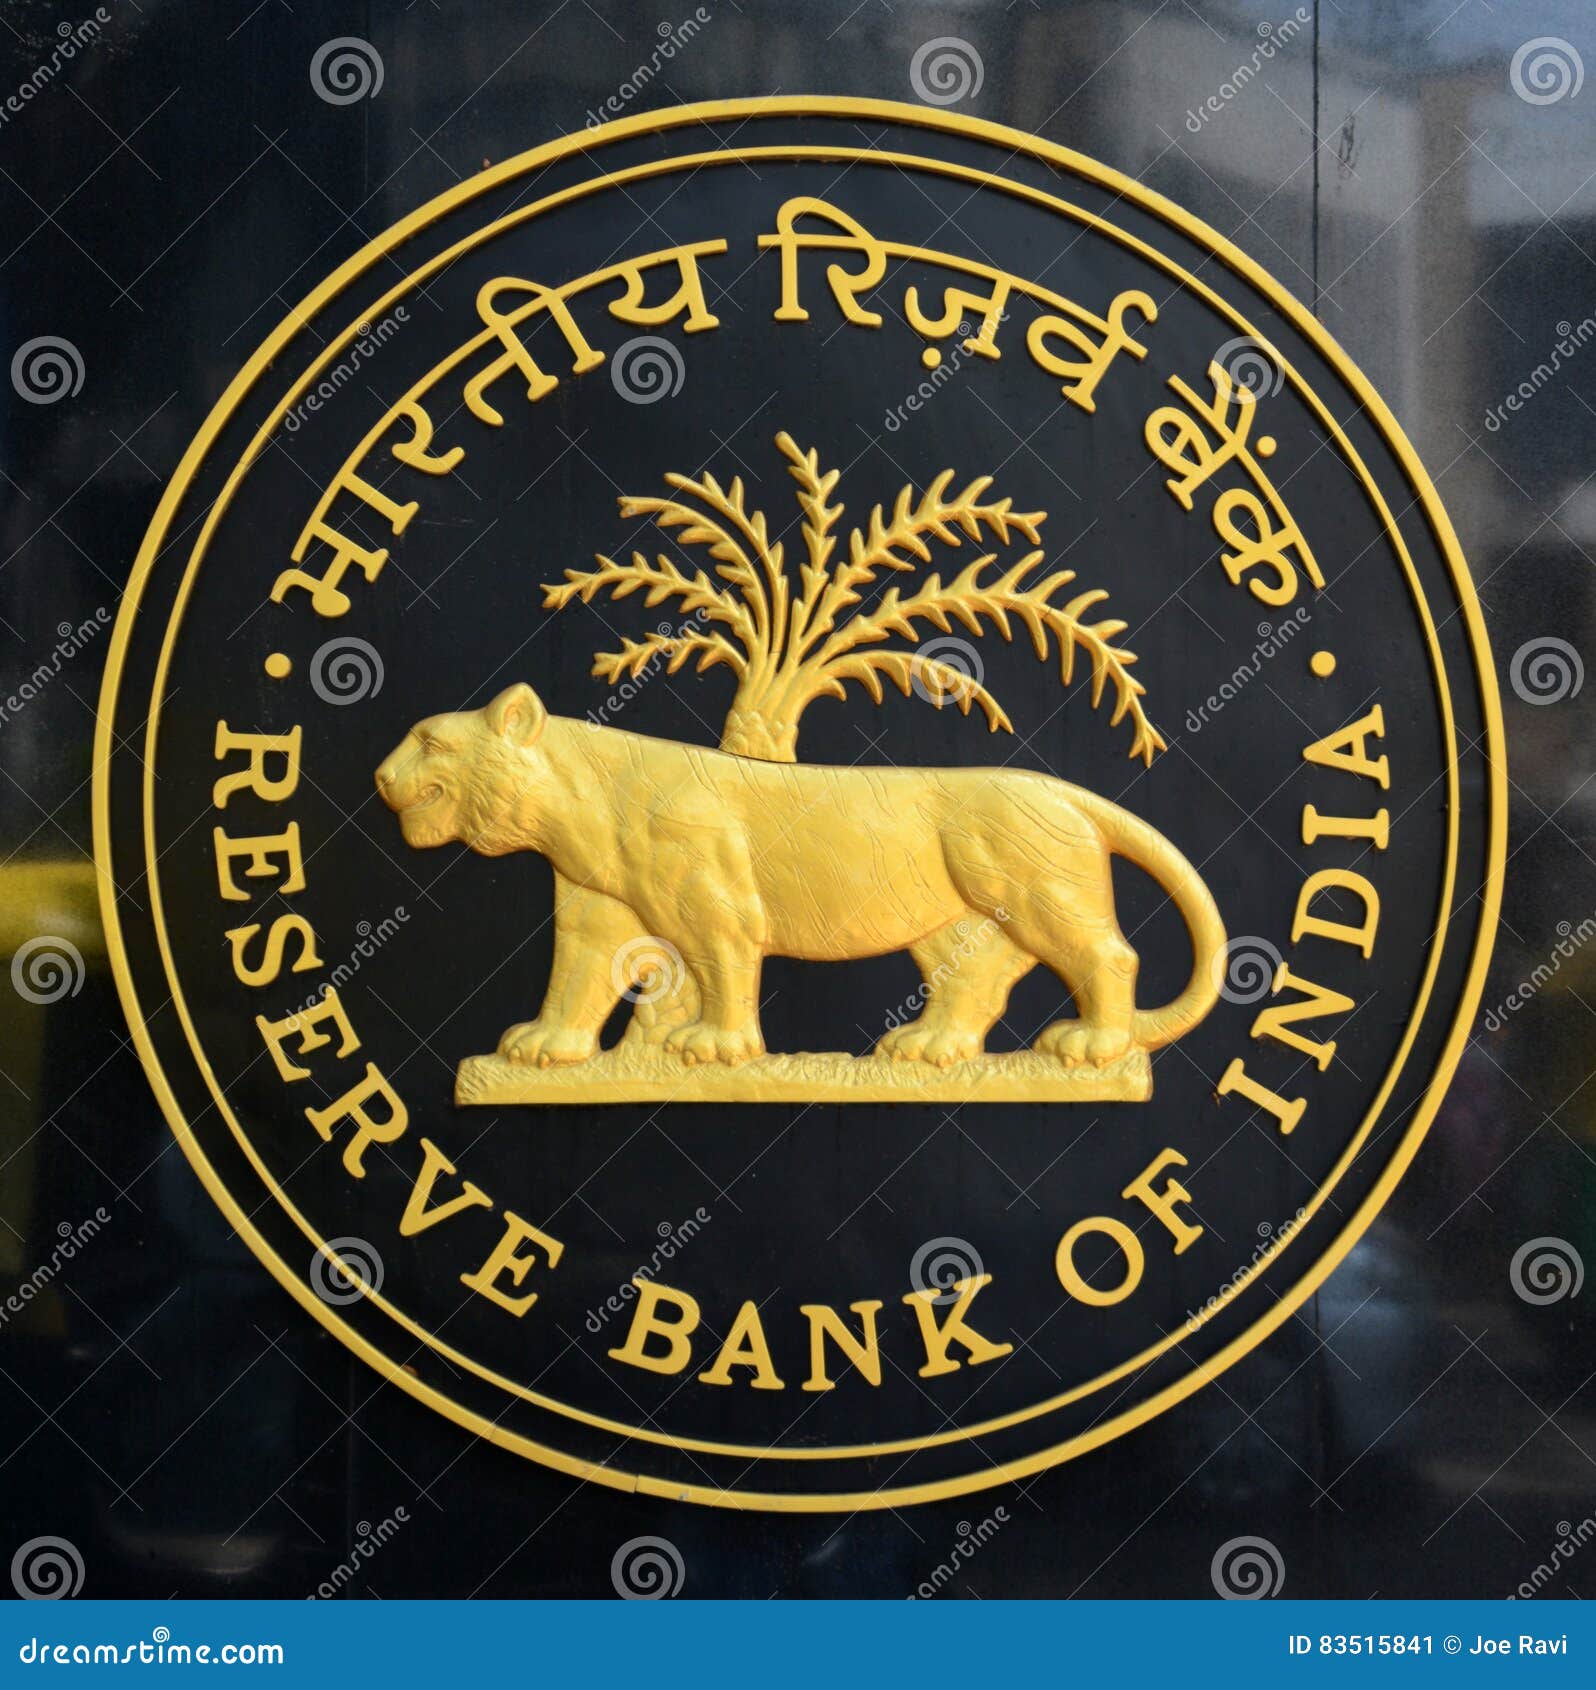 Union Bank Of India Logo And Tagline